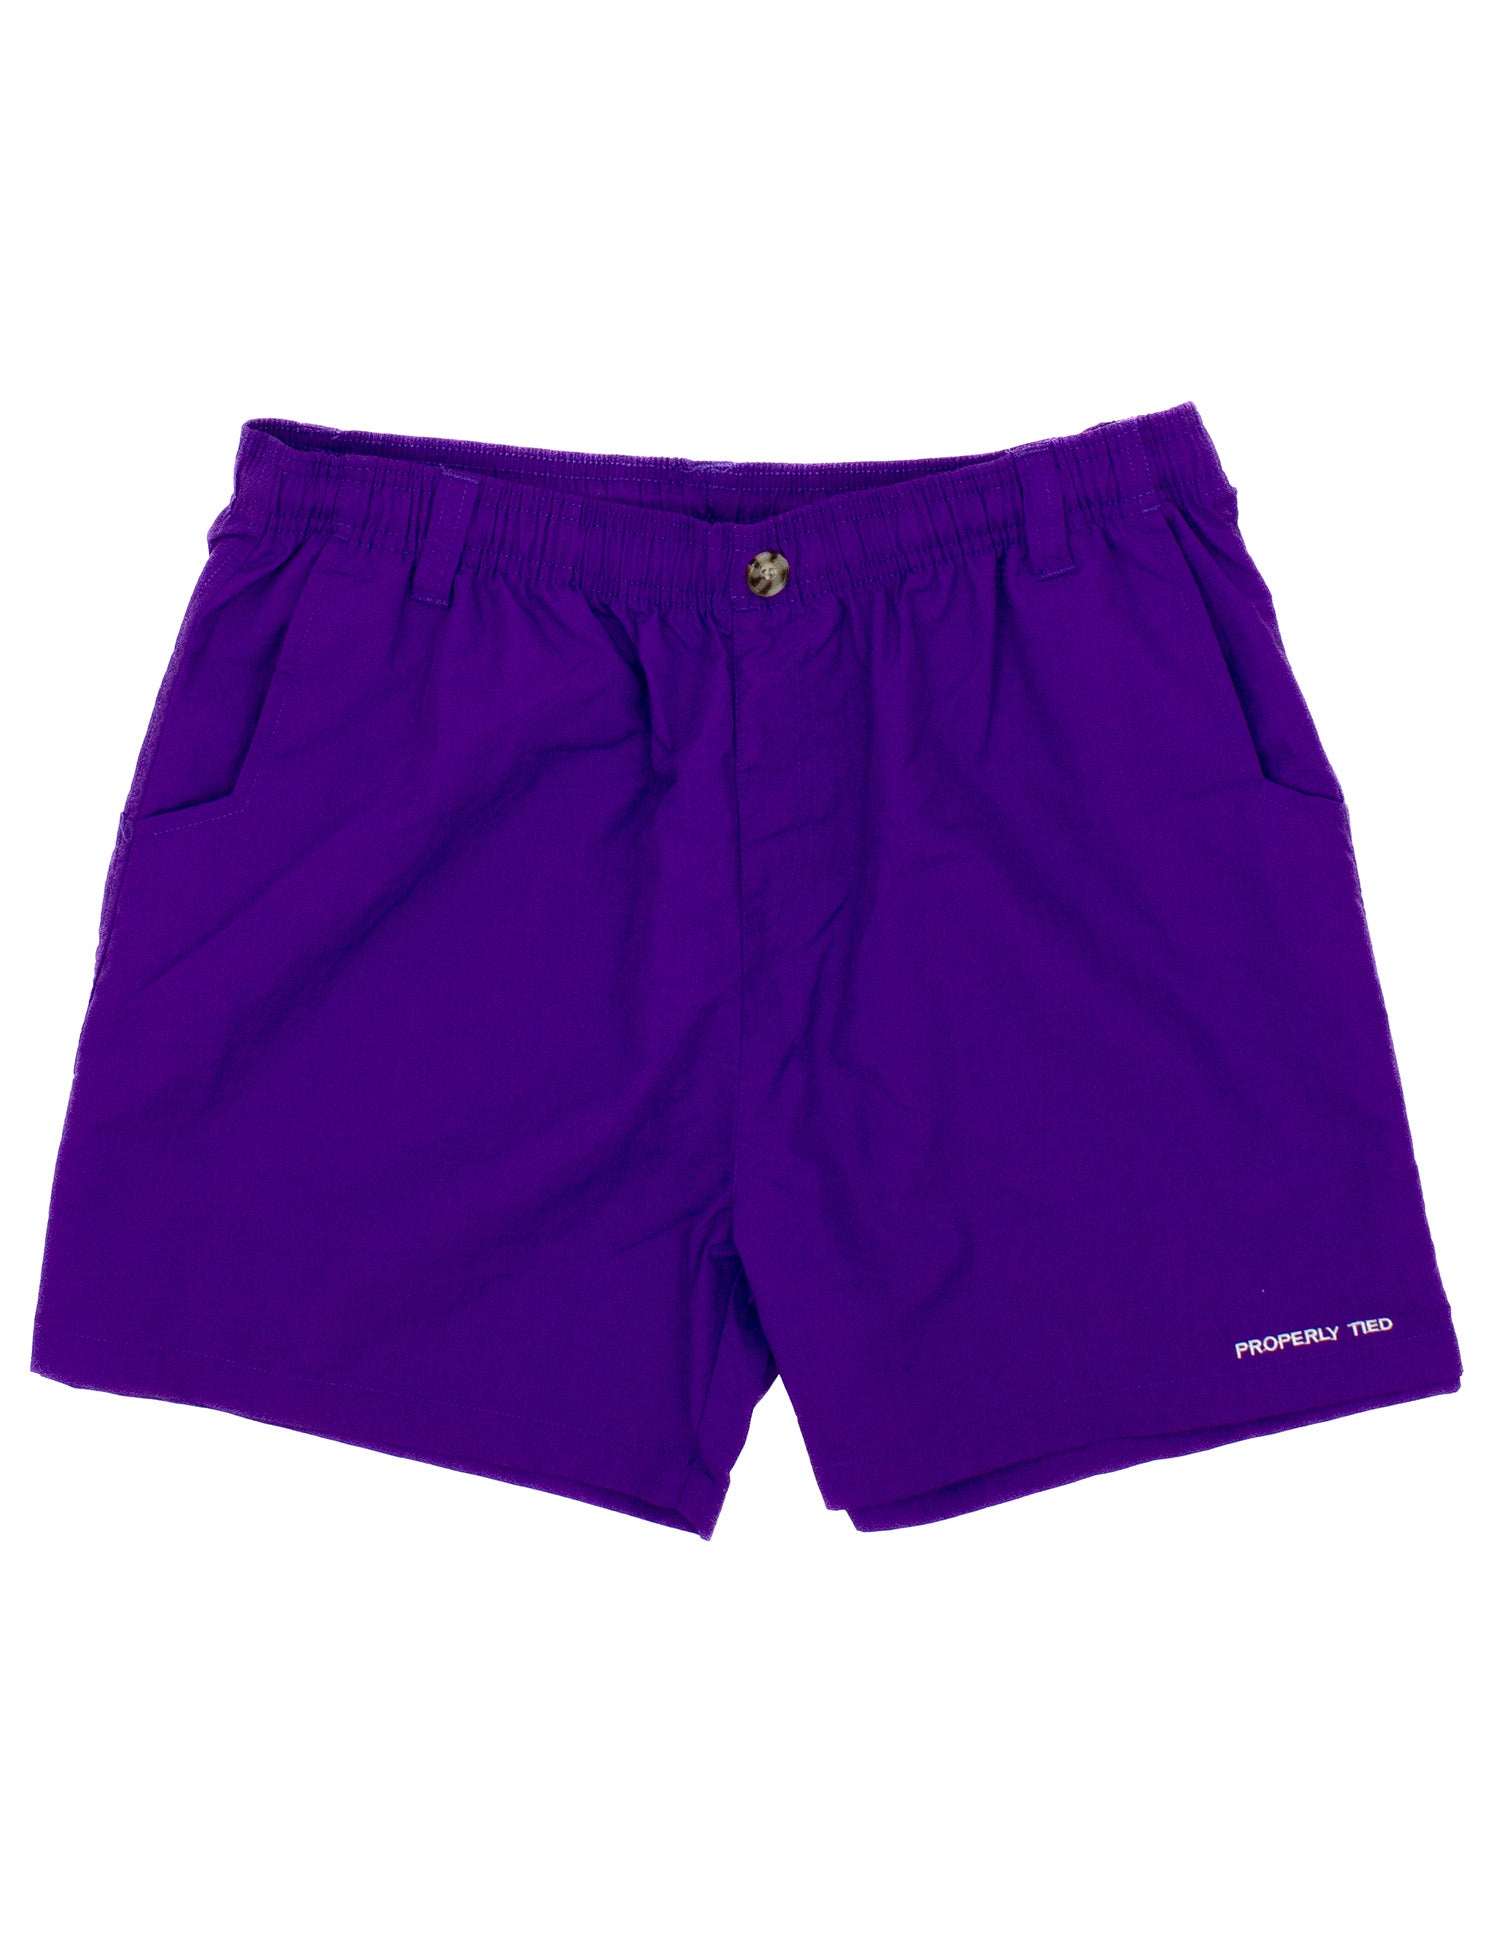 A Properly Tied Purple Mallard Short with a white logo, combining style and comfort.